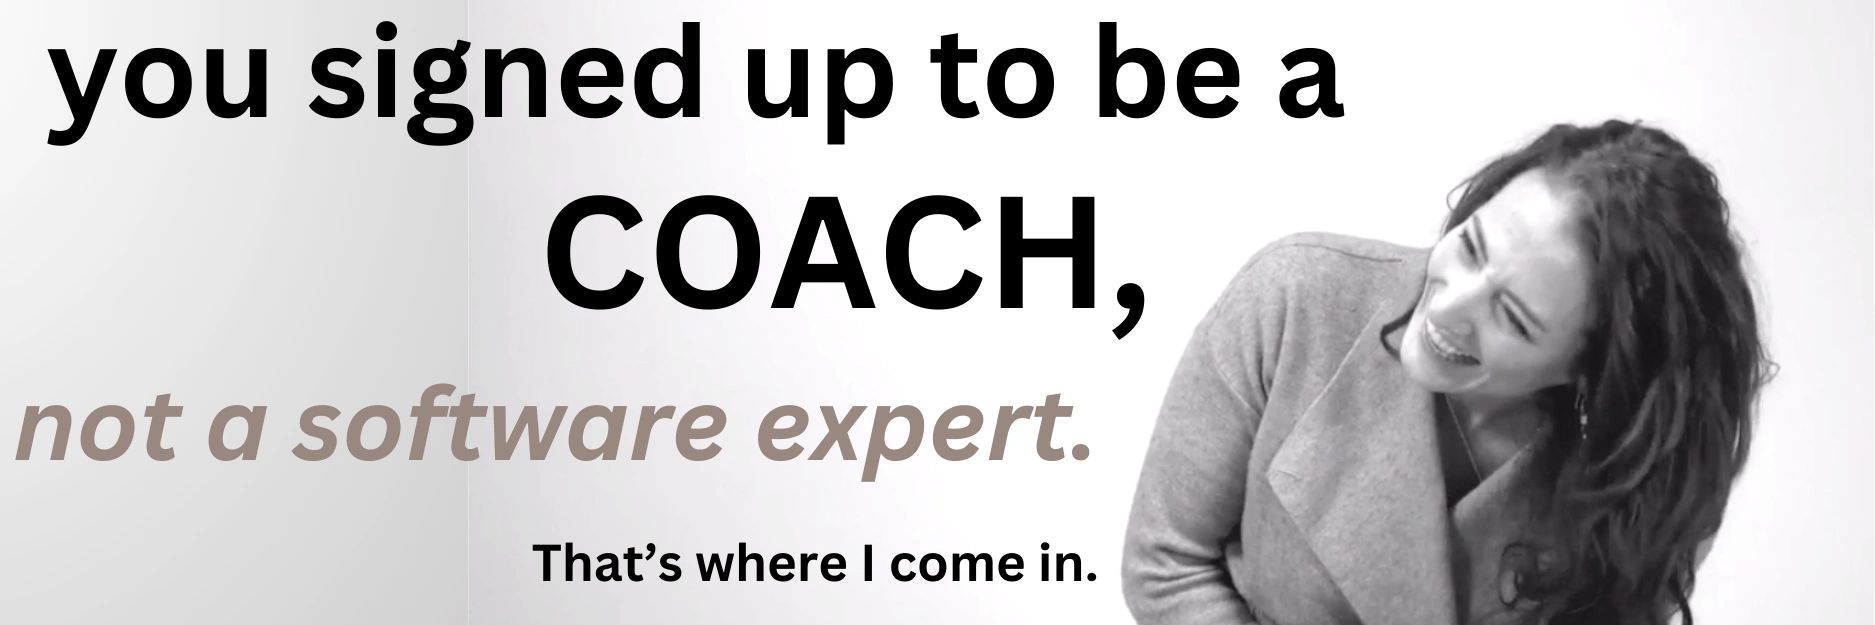 You signed up to be a coach, not a software expert. CoachAccountable setup expertise